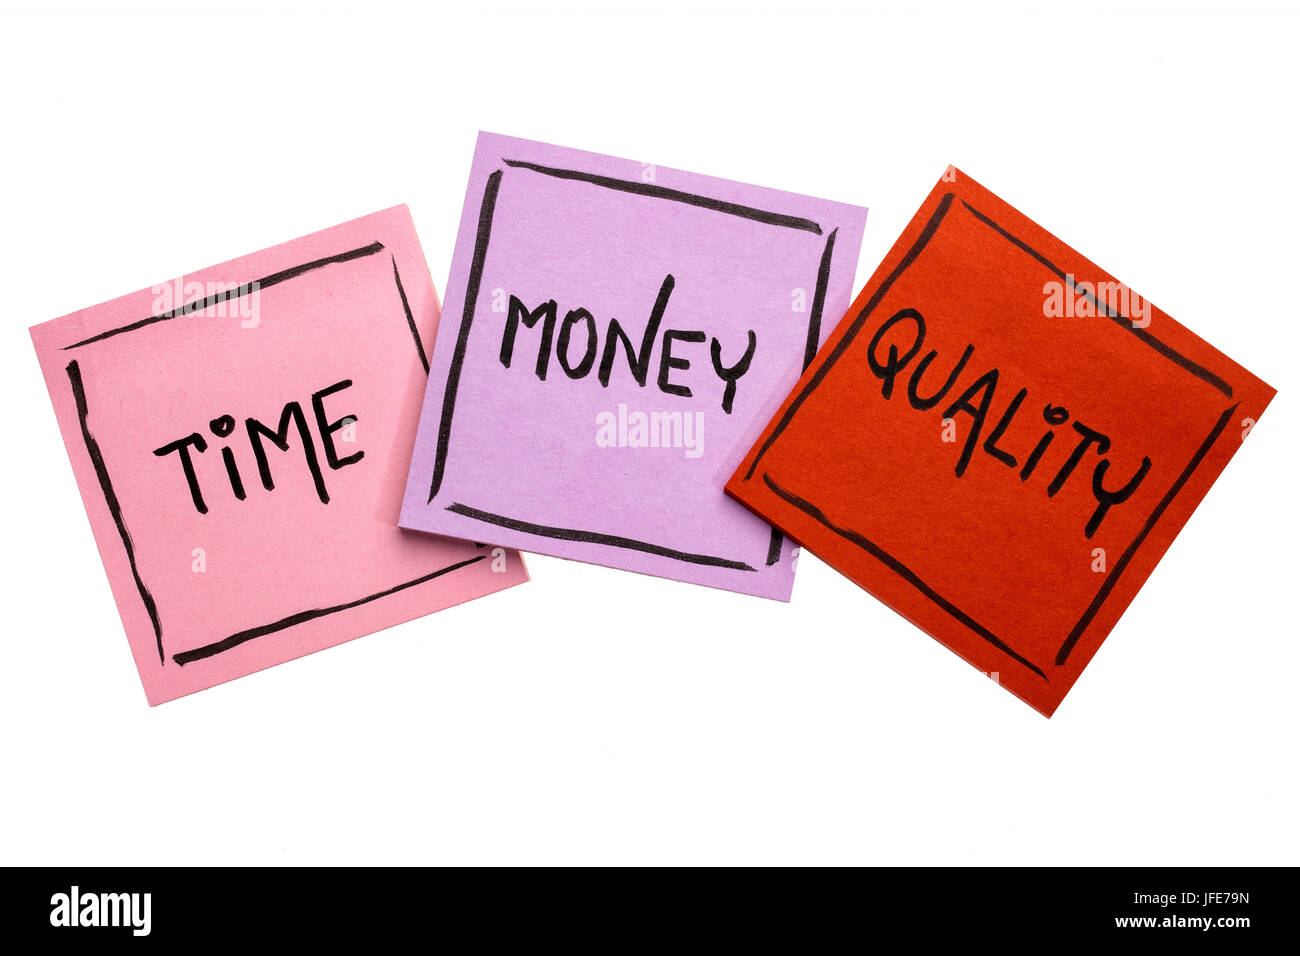 time, money, quality concept - handwriting in black ink on isolated sticky notes Stock Photo